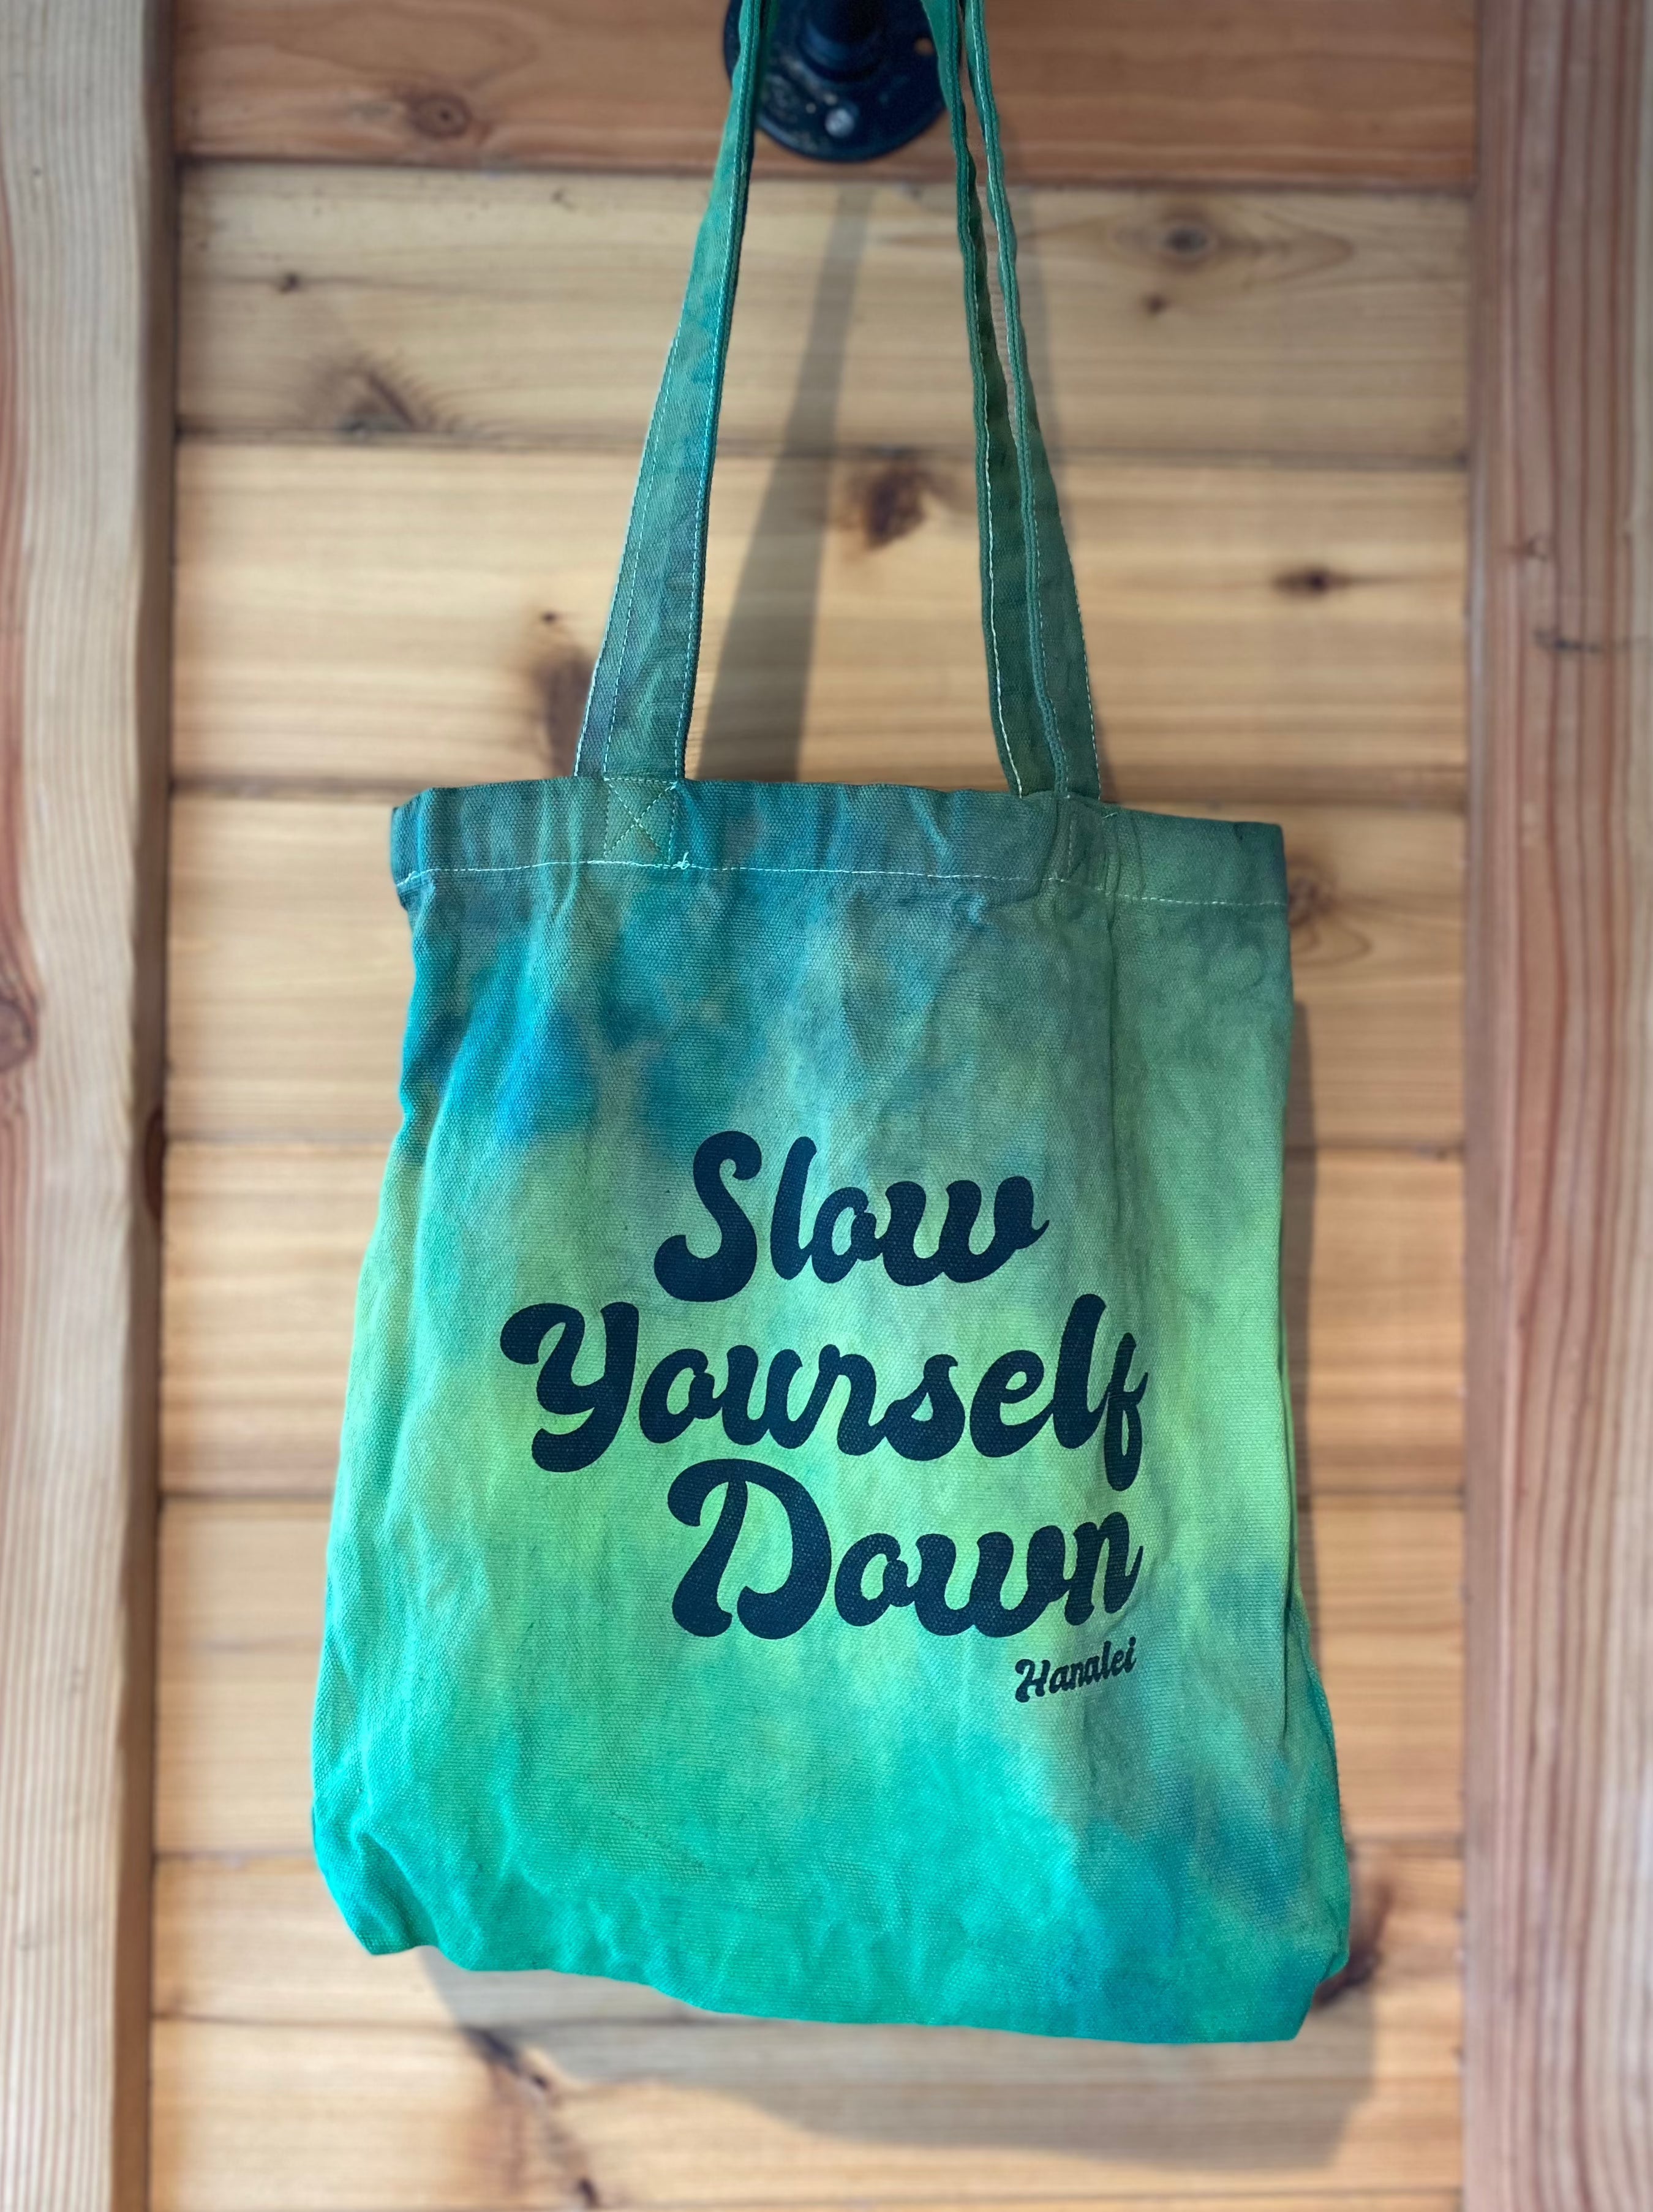 Locally Tie Dyed Tote Bags